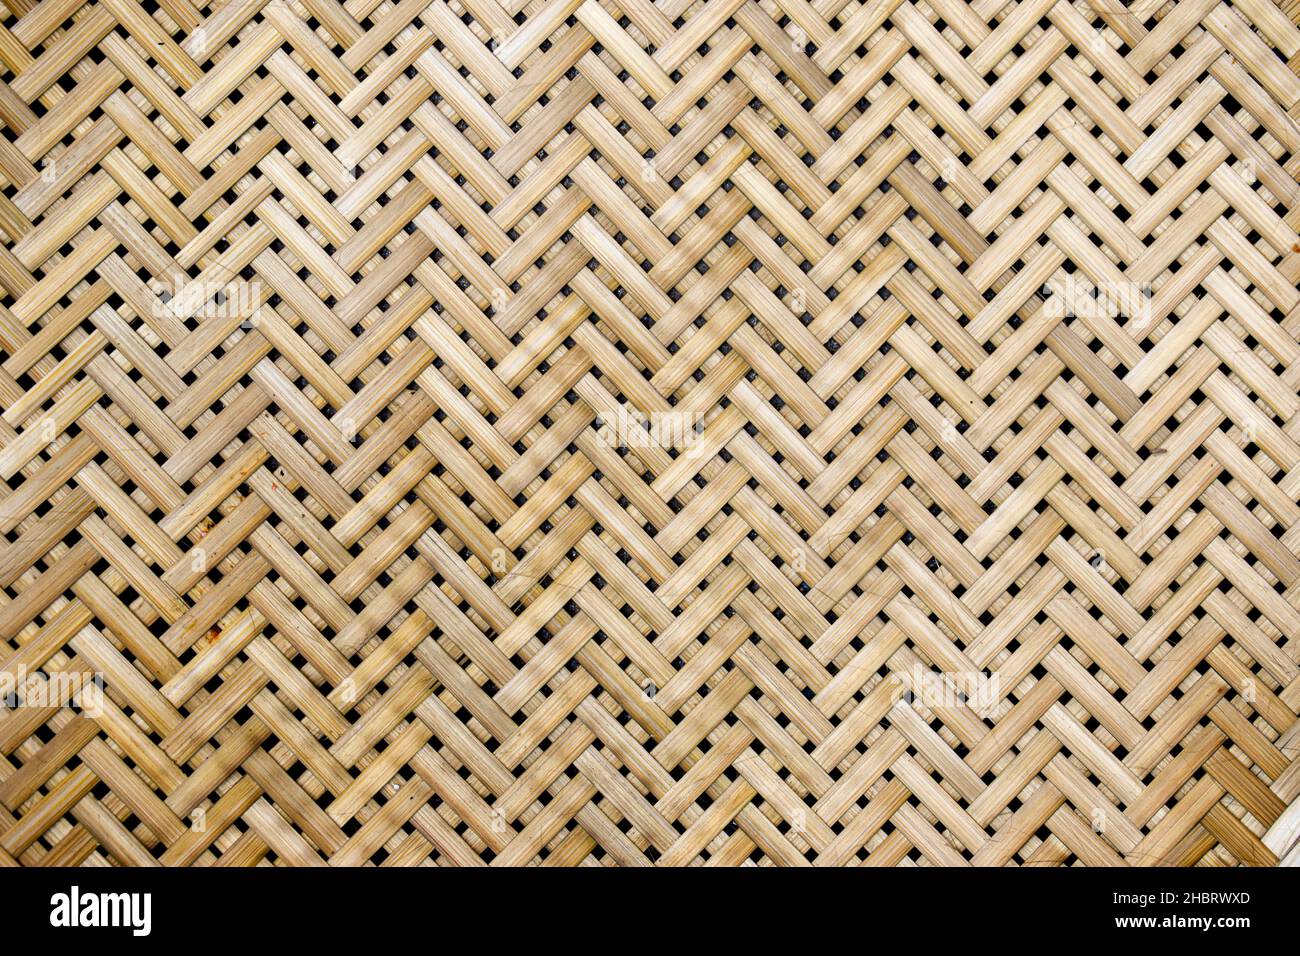 Background picture of natural bamboo mat pattern. Made in Asian, Myanmar. Stock Photo